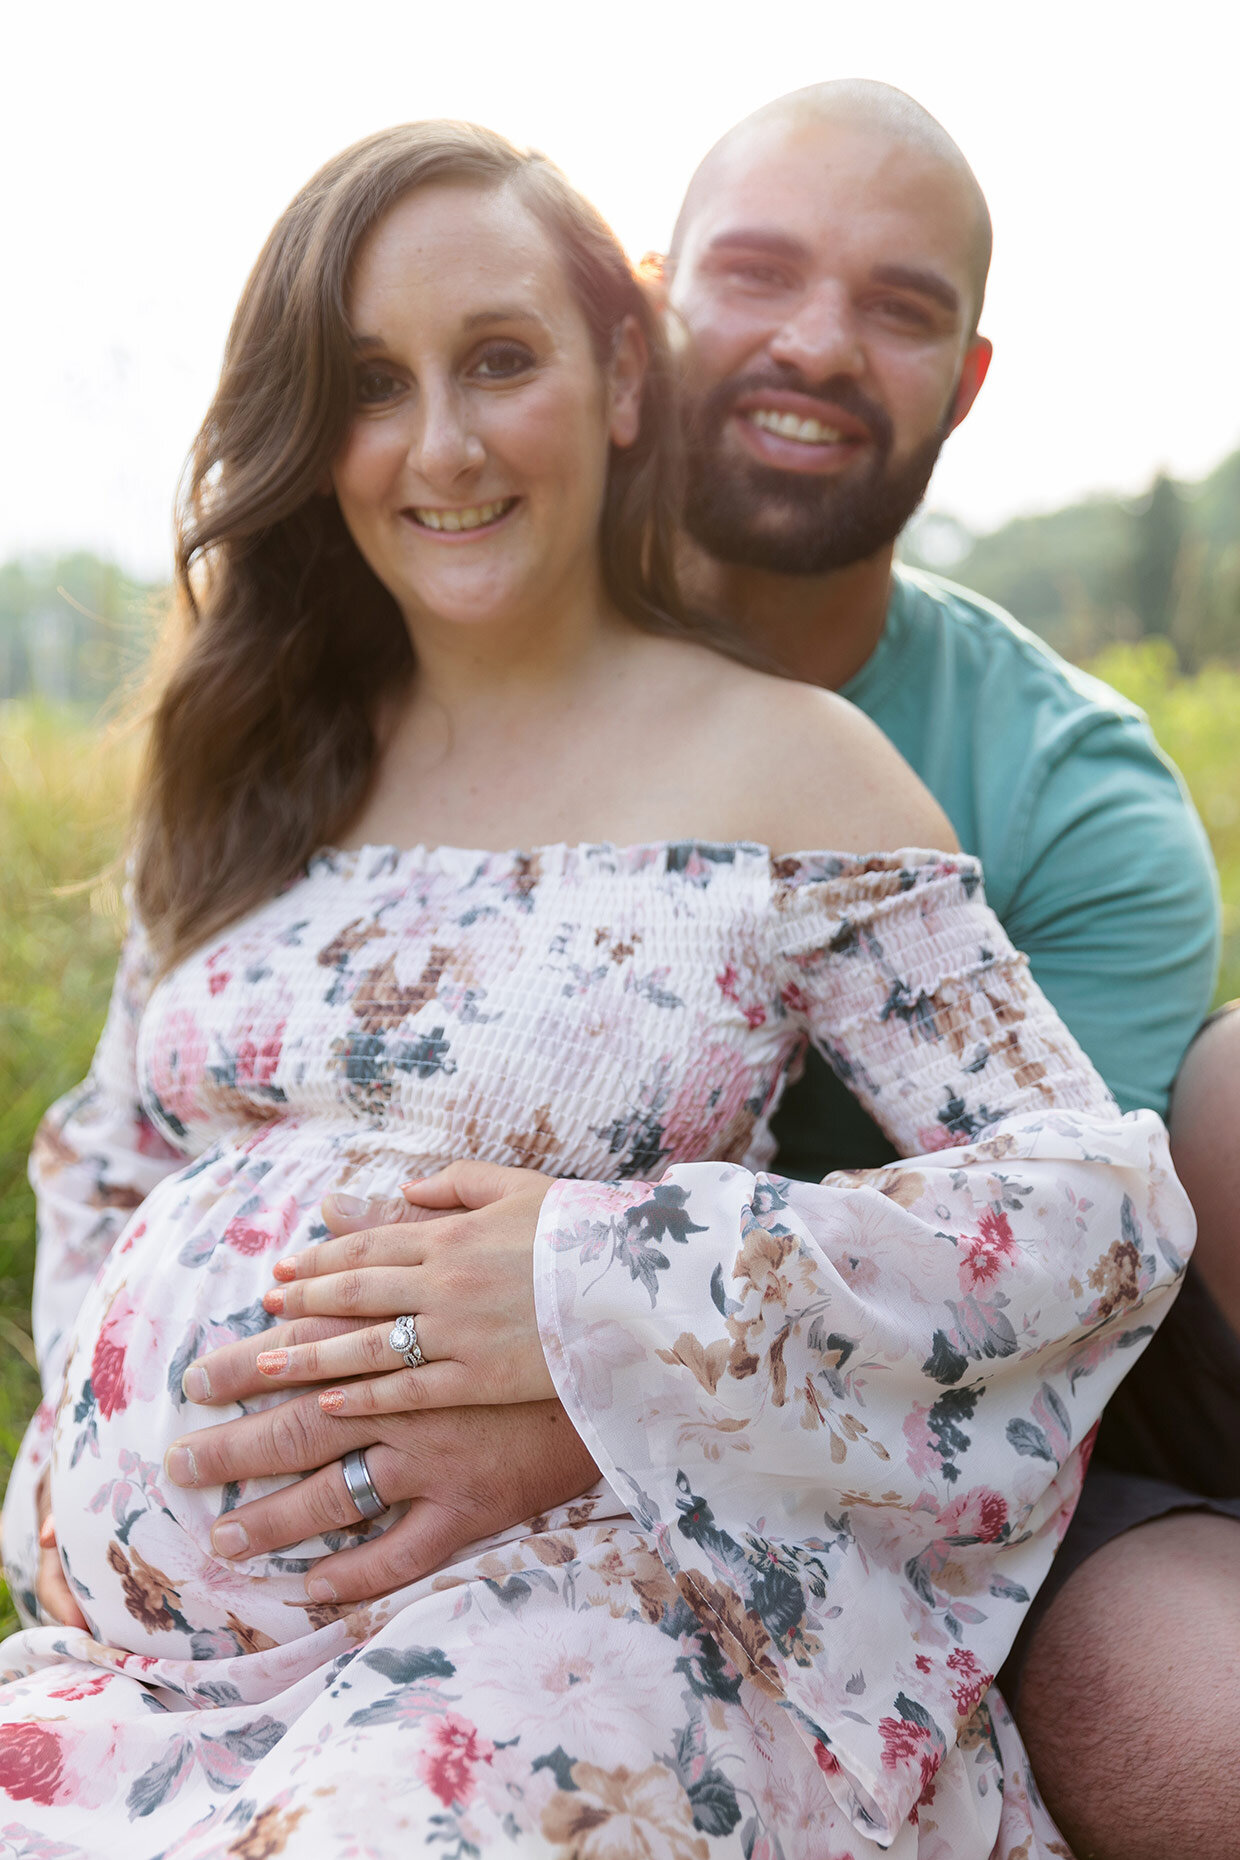 Baby Belly at Maternity session Golden Hour